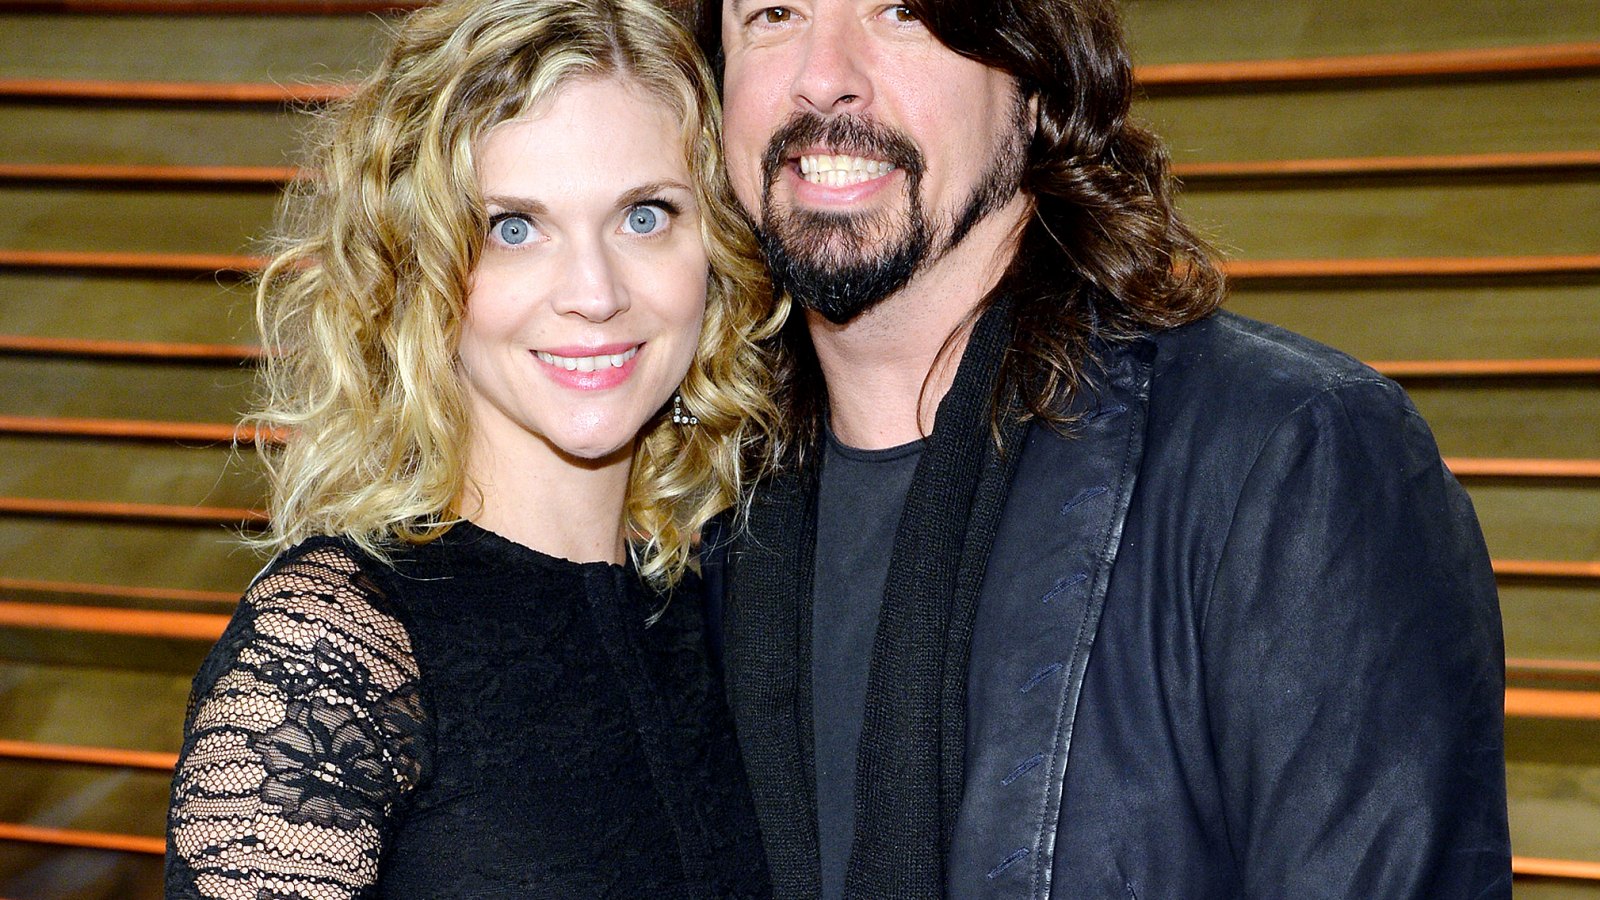 Jordyn Blum and Dave Grohl